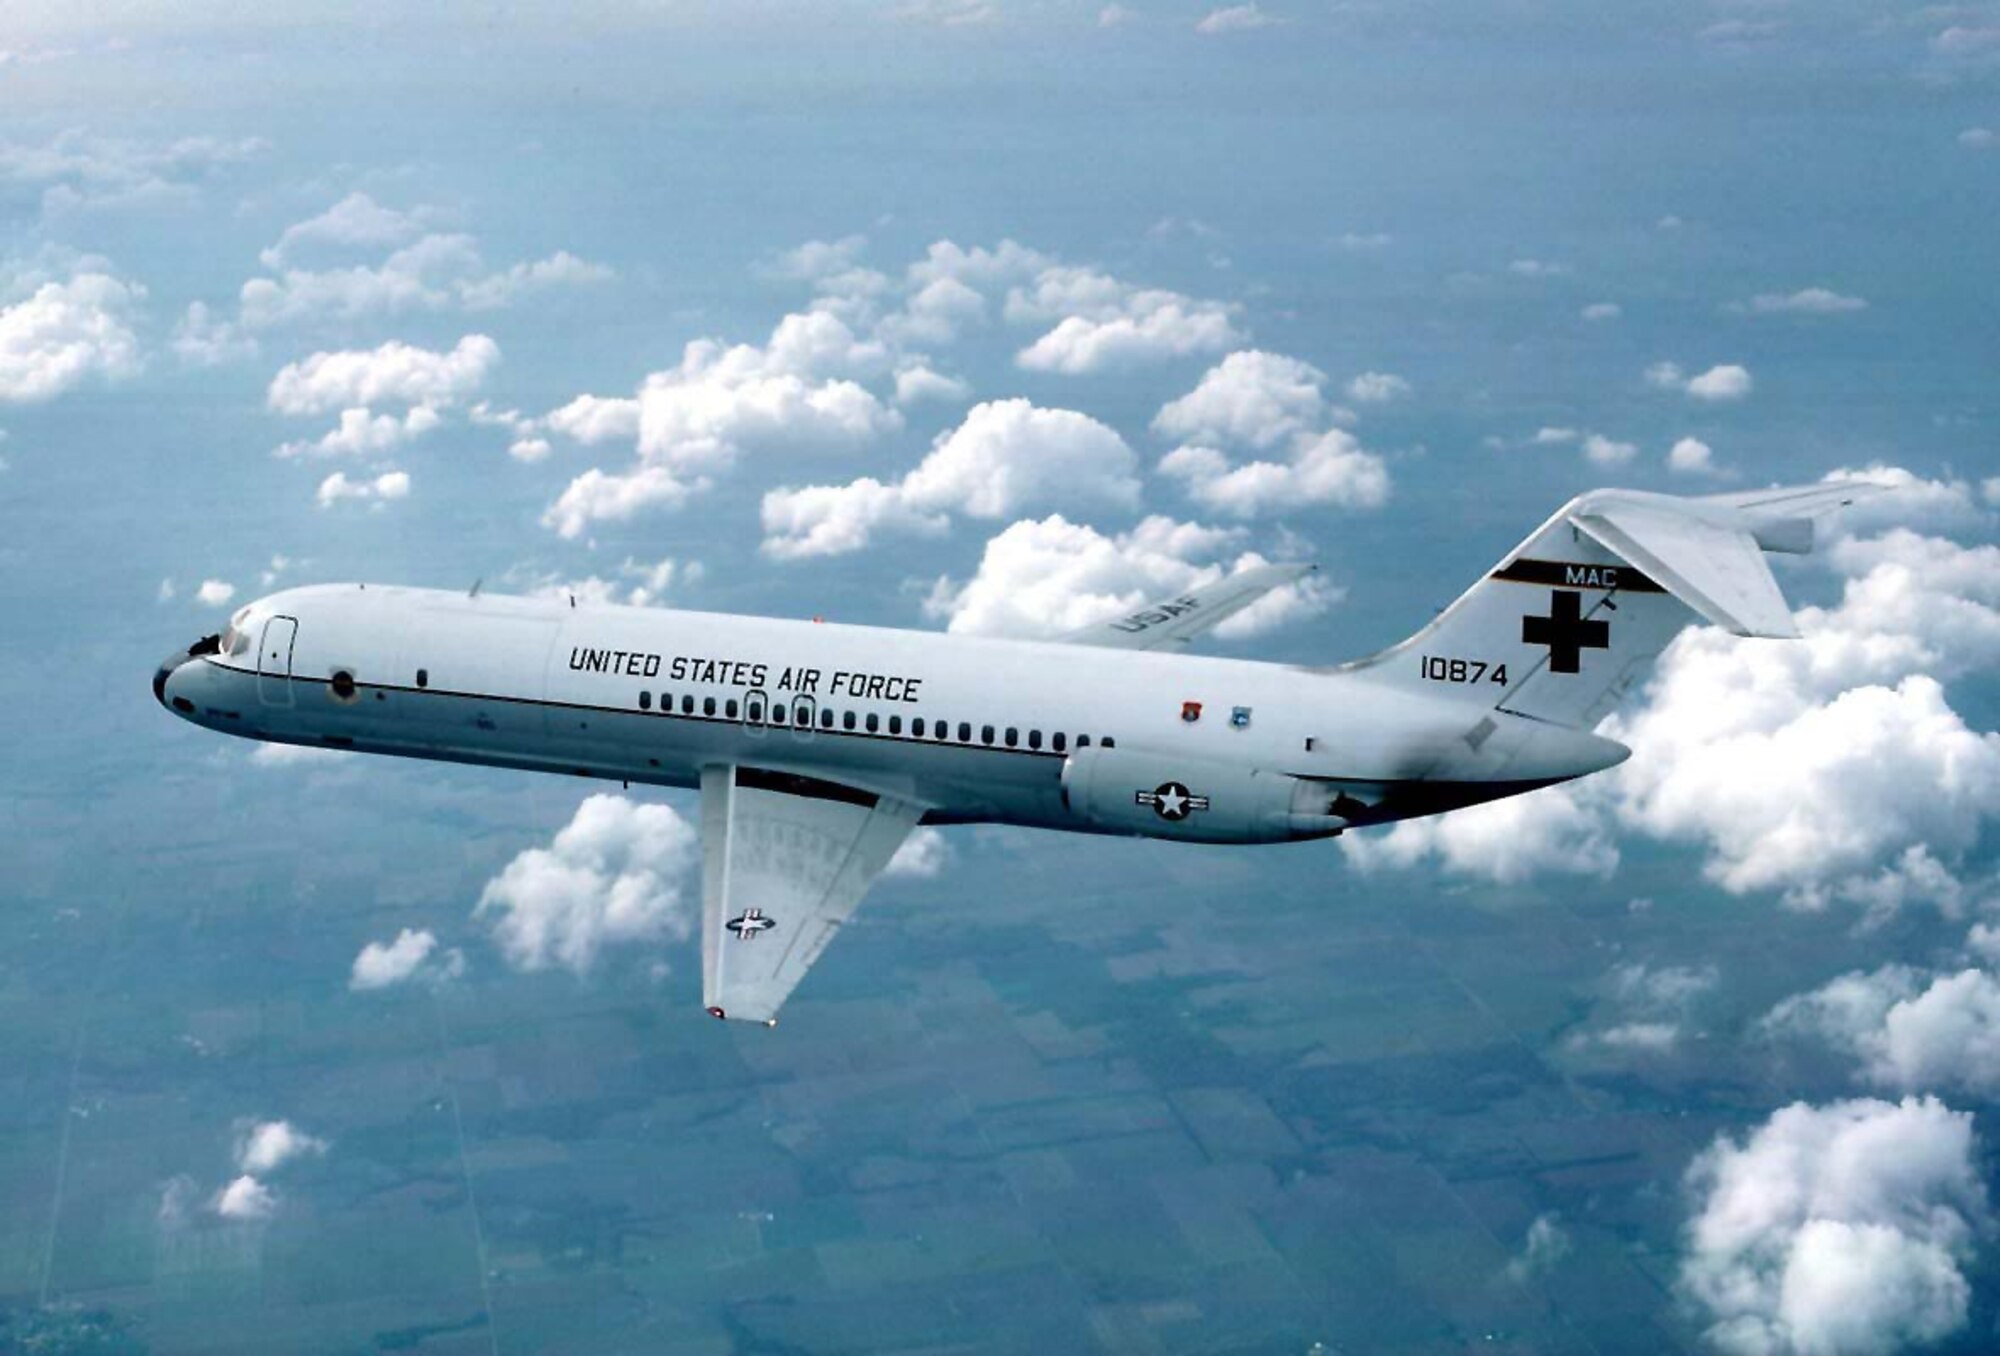 The C-9A, which was in use between 1968 and 2003, was the only aircraft specifically designed for the movement of litter and ambulatory patients. The specialized capabilities, such as isolation areas and electrical systems to support medical devices, made it easier and safer to transport critical patients. (U.S. Air Force photo)